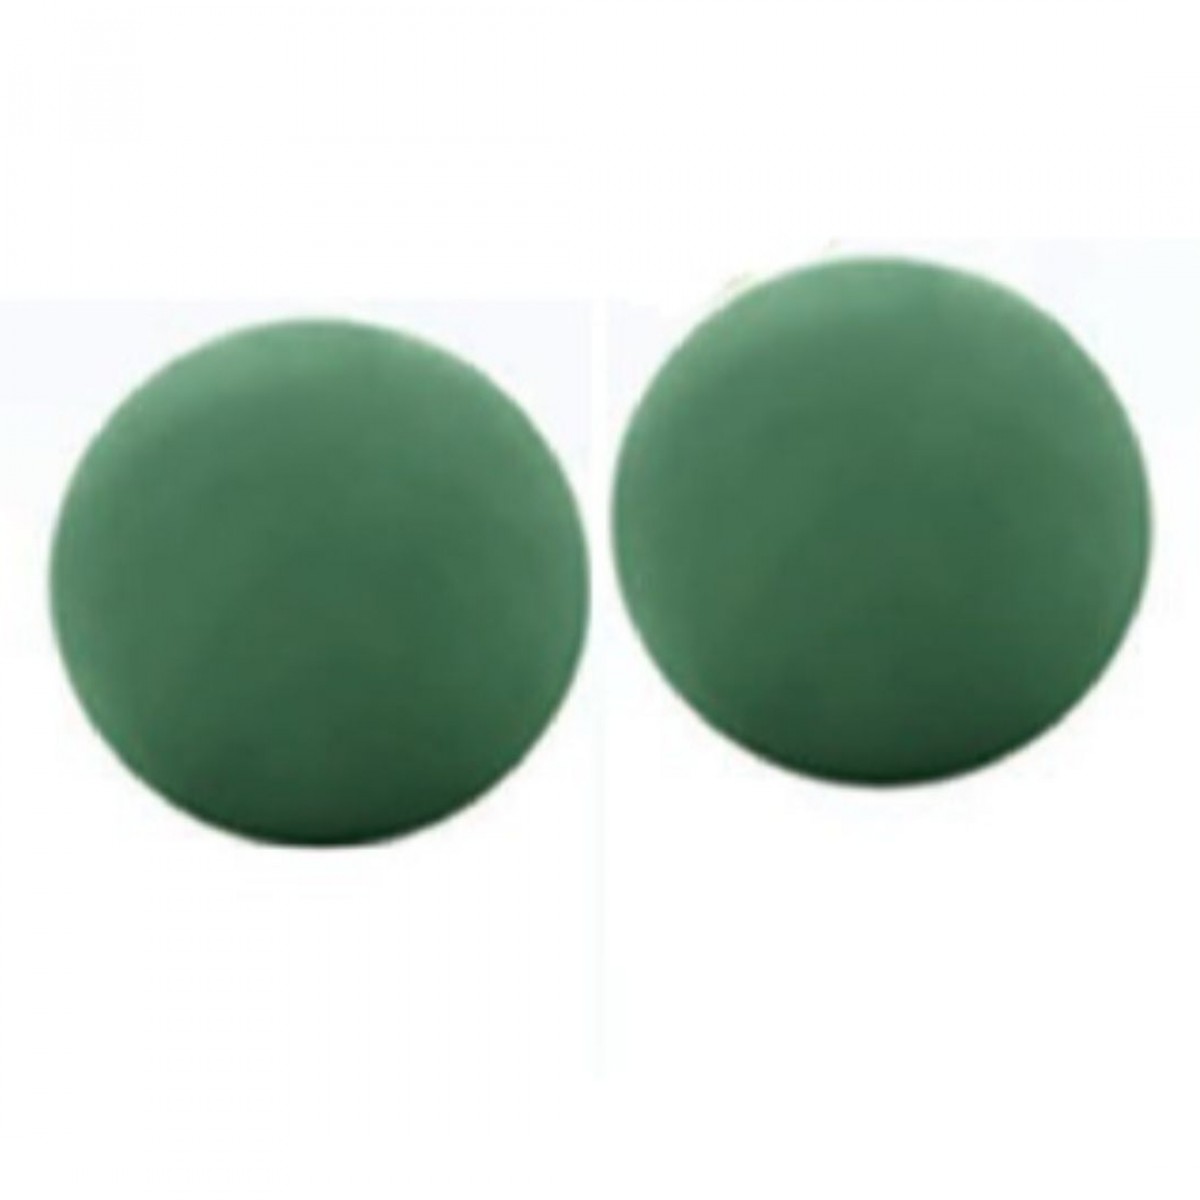 220mm (4 No) Oasis Floral Foam Spheres without Net